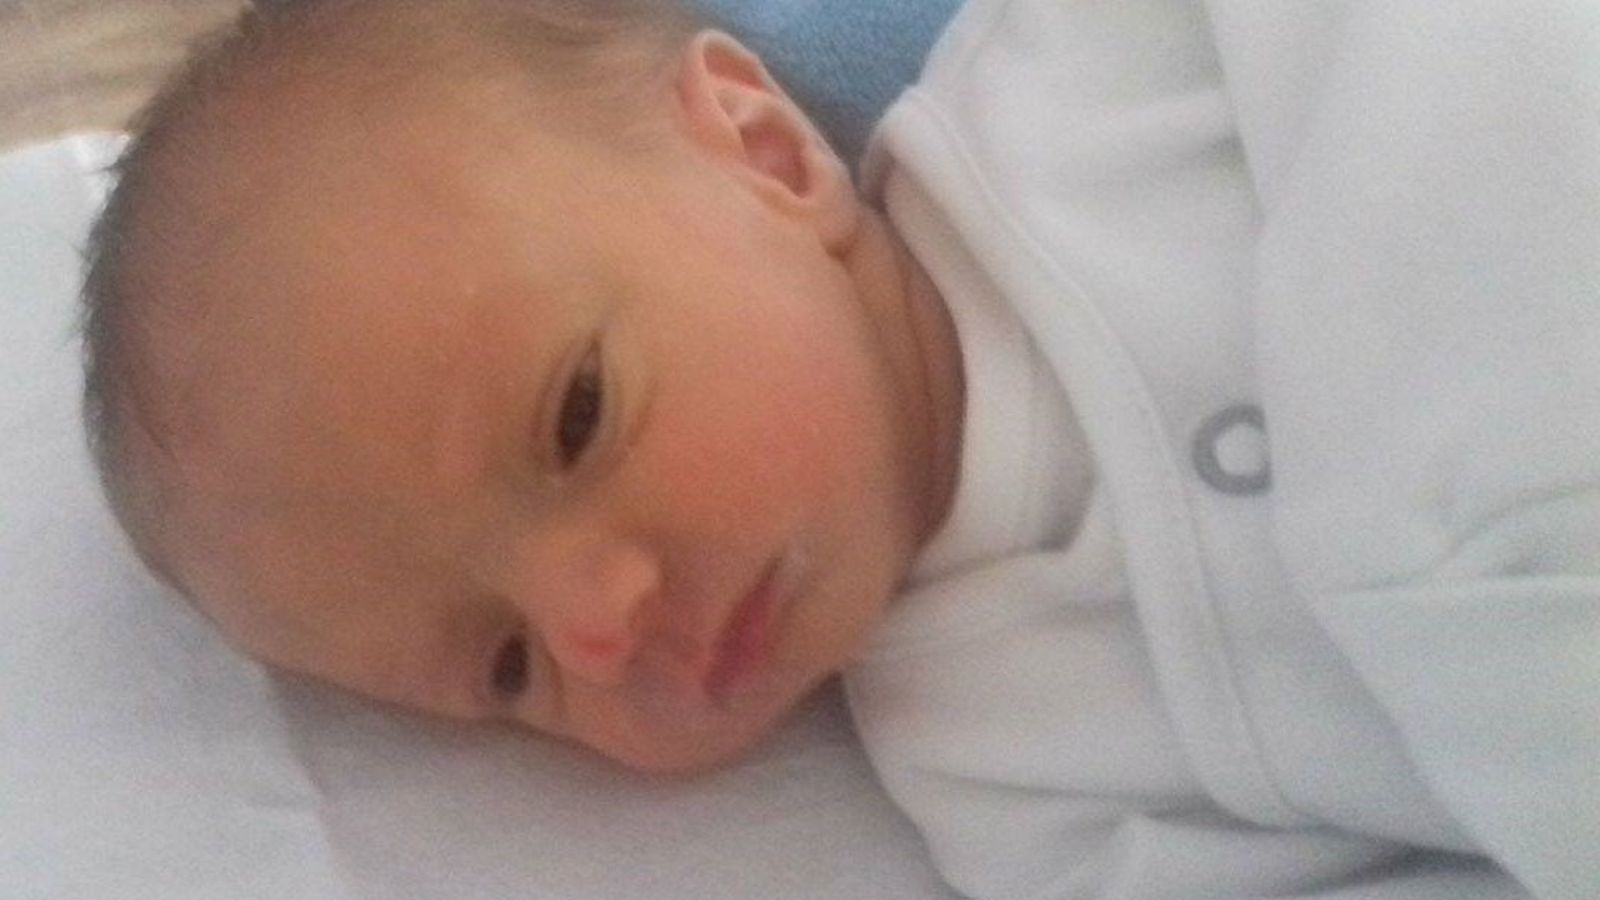 Michael Davis given life sentence for murdering his baby son - who suffered a 'snapped neck'